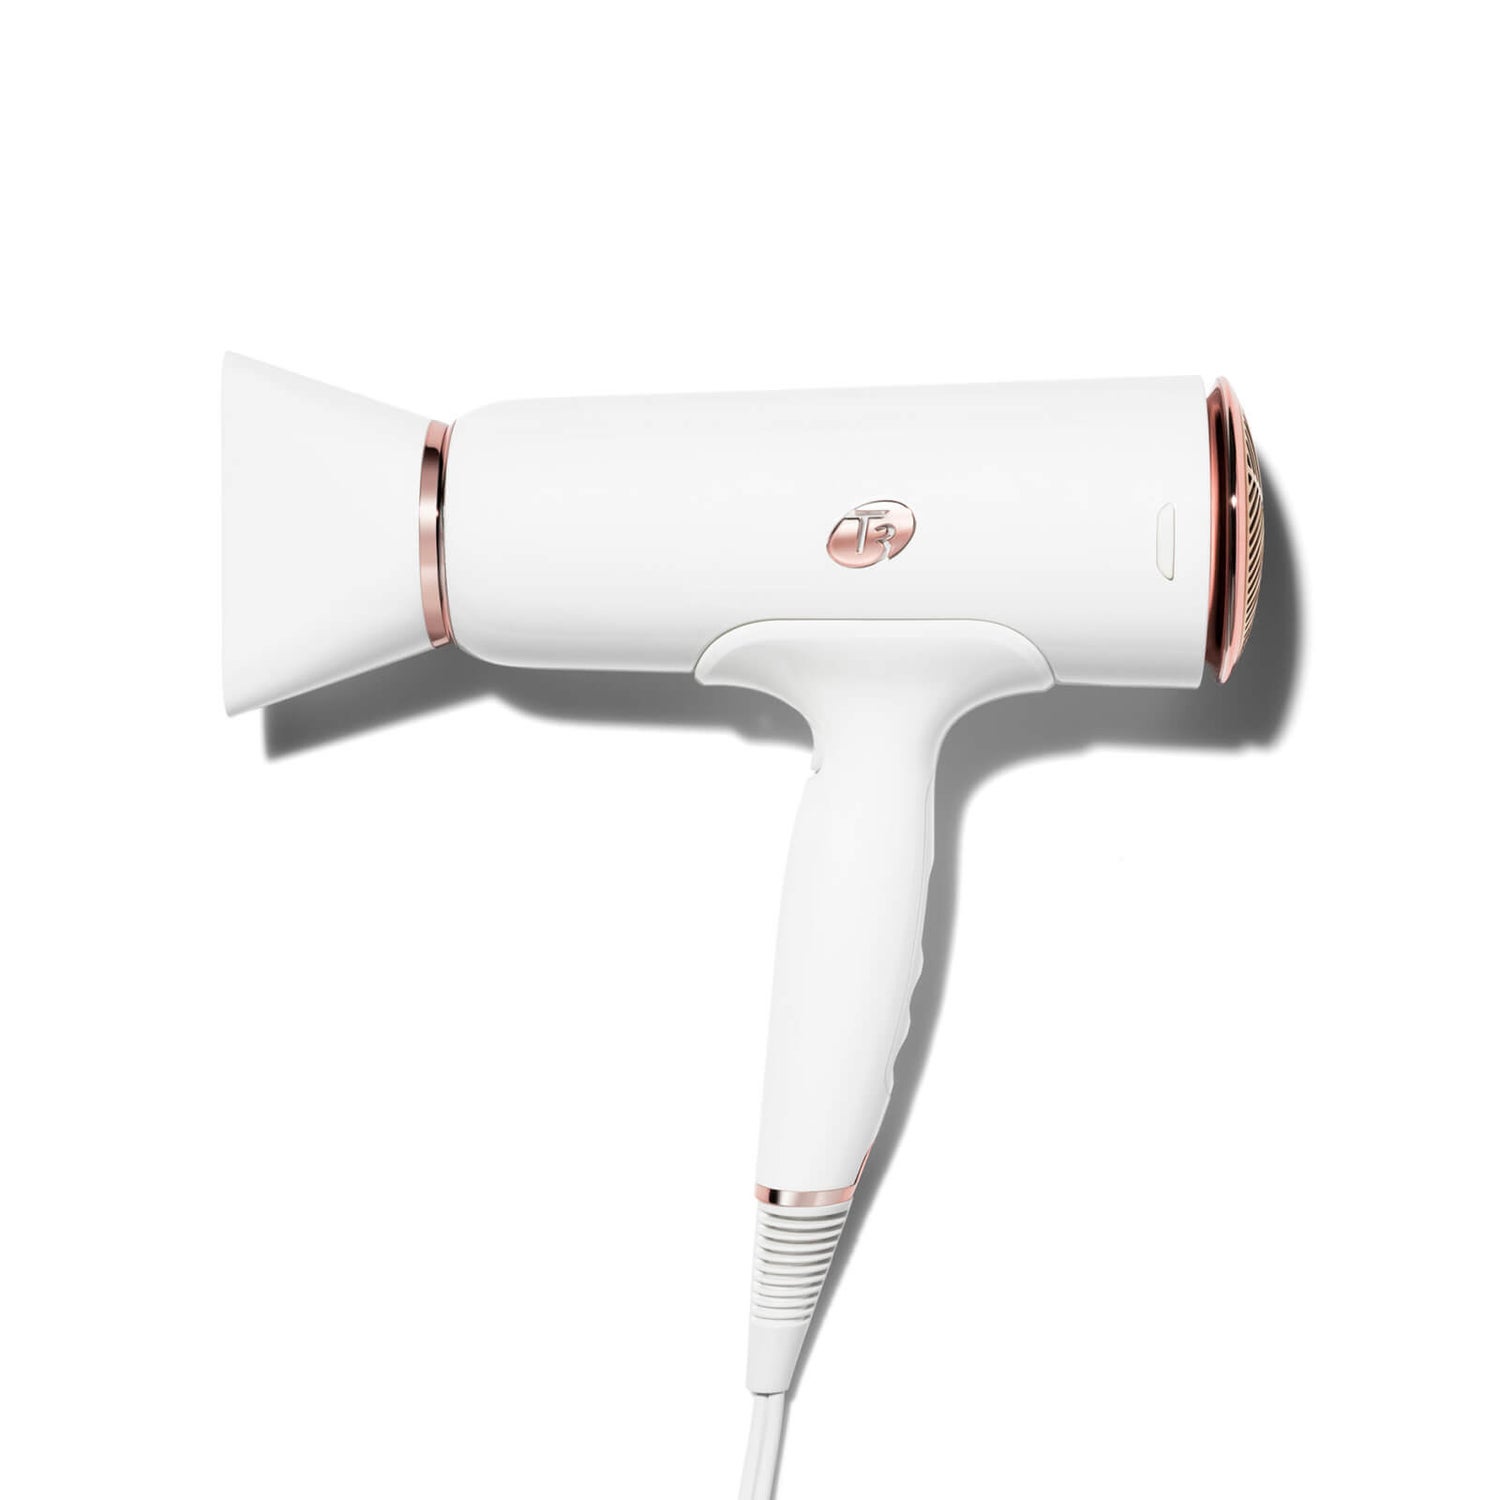 T3 Cura Luxe Professional Ionic Hair Dryer - White